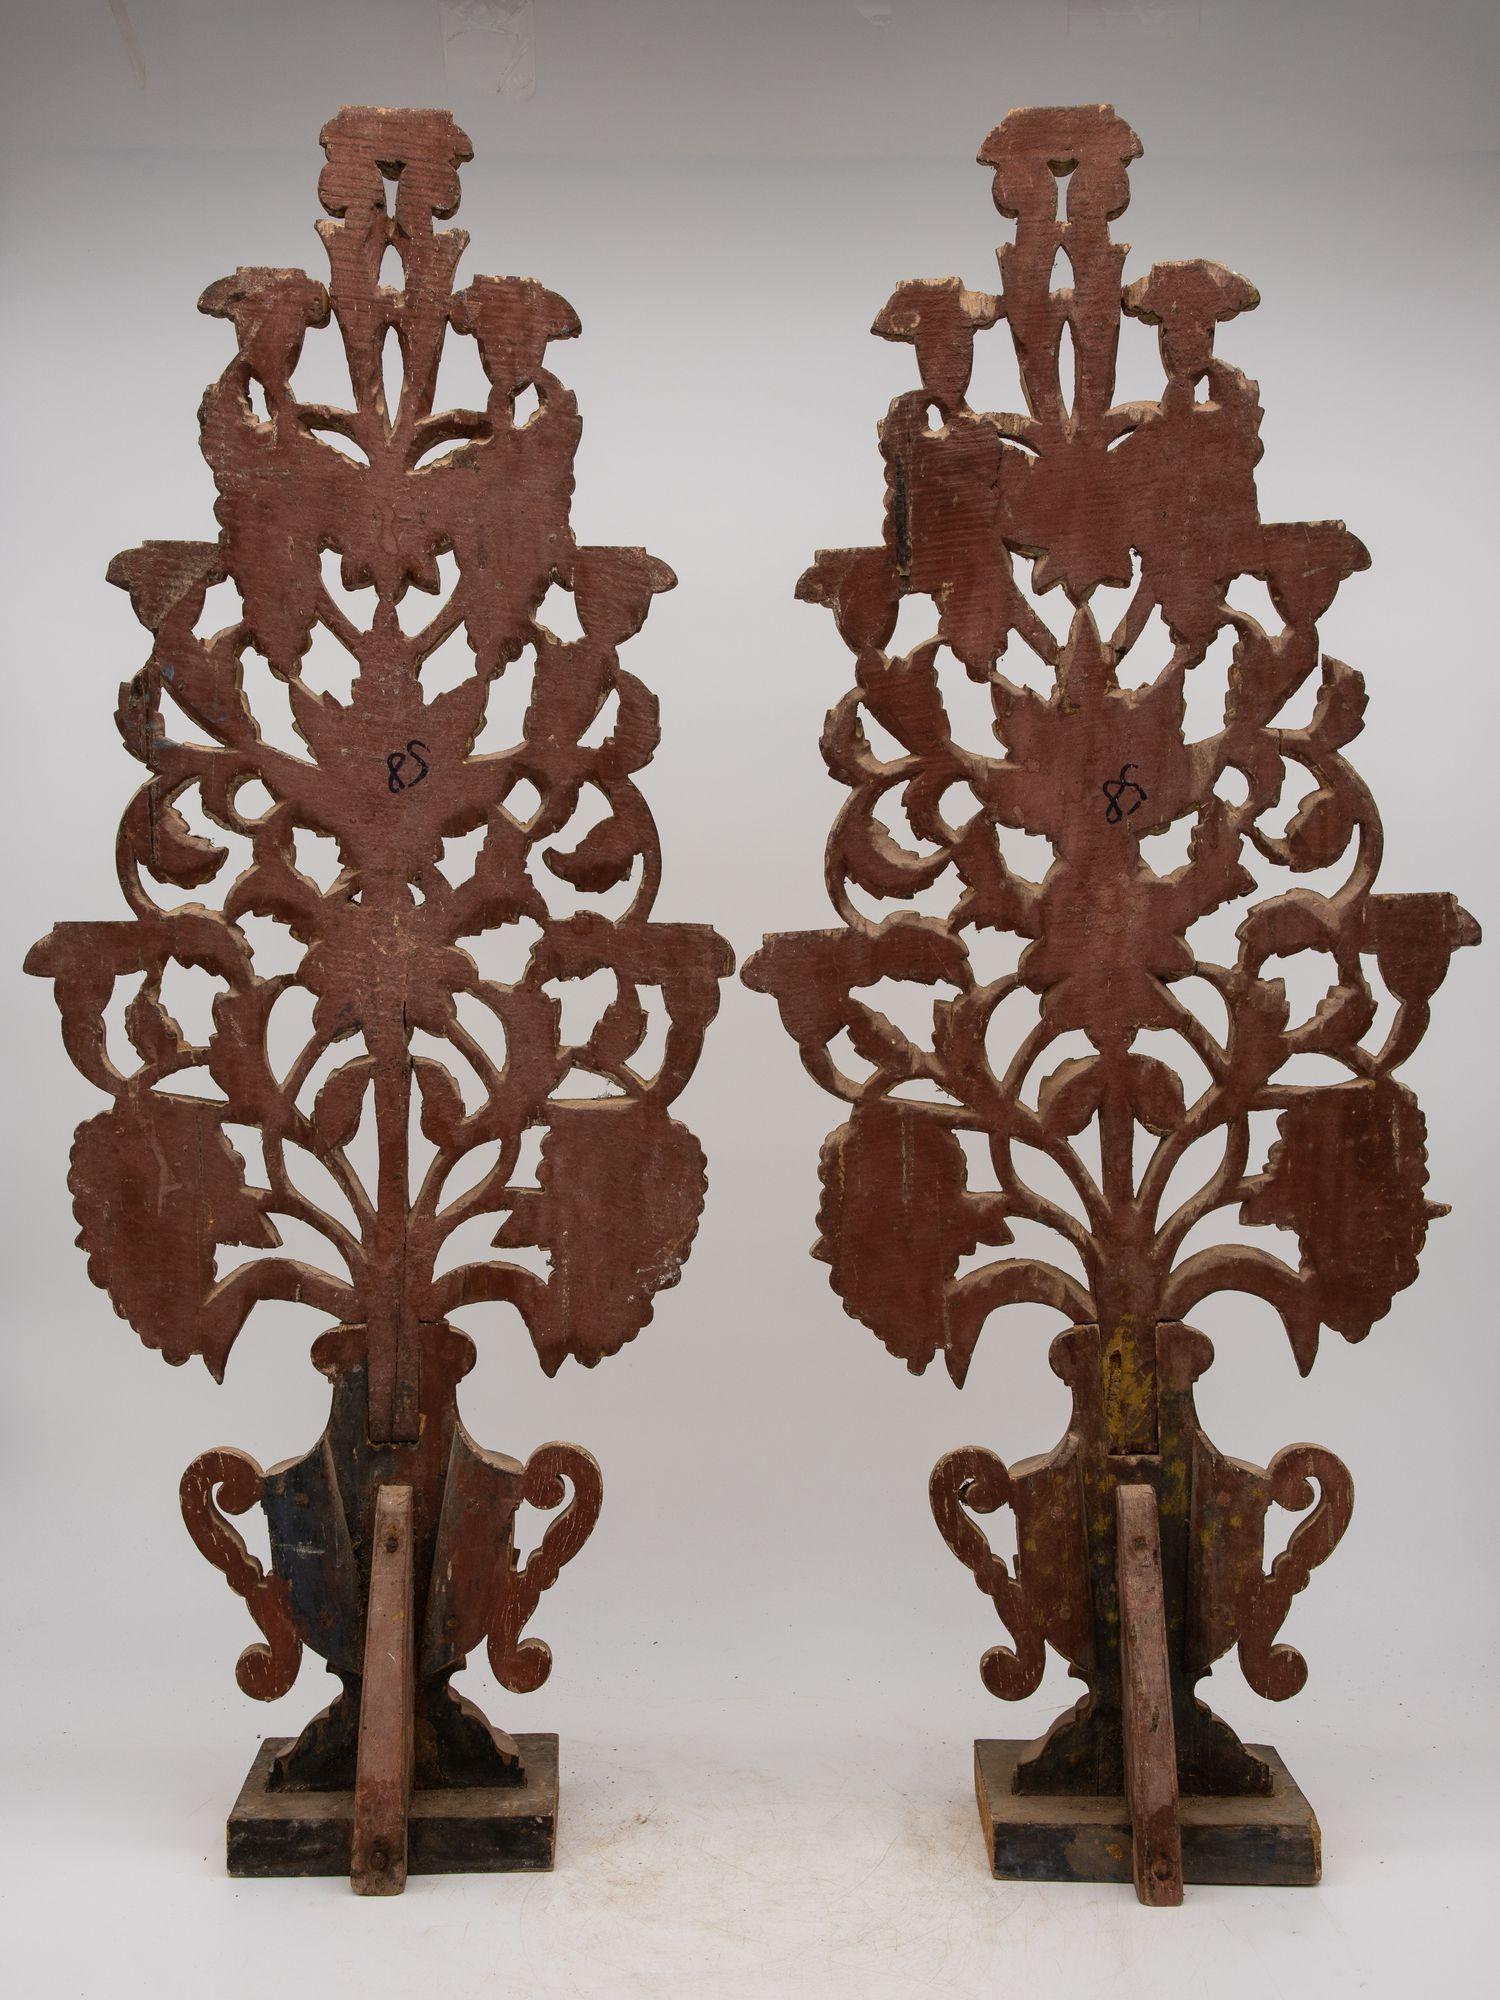 Pair Antique Carved Wood Urns with Flowers Mantle Ornaments, 19th C For Sale 3